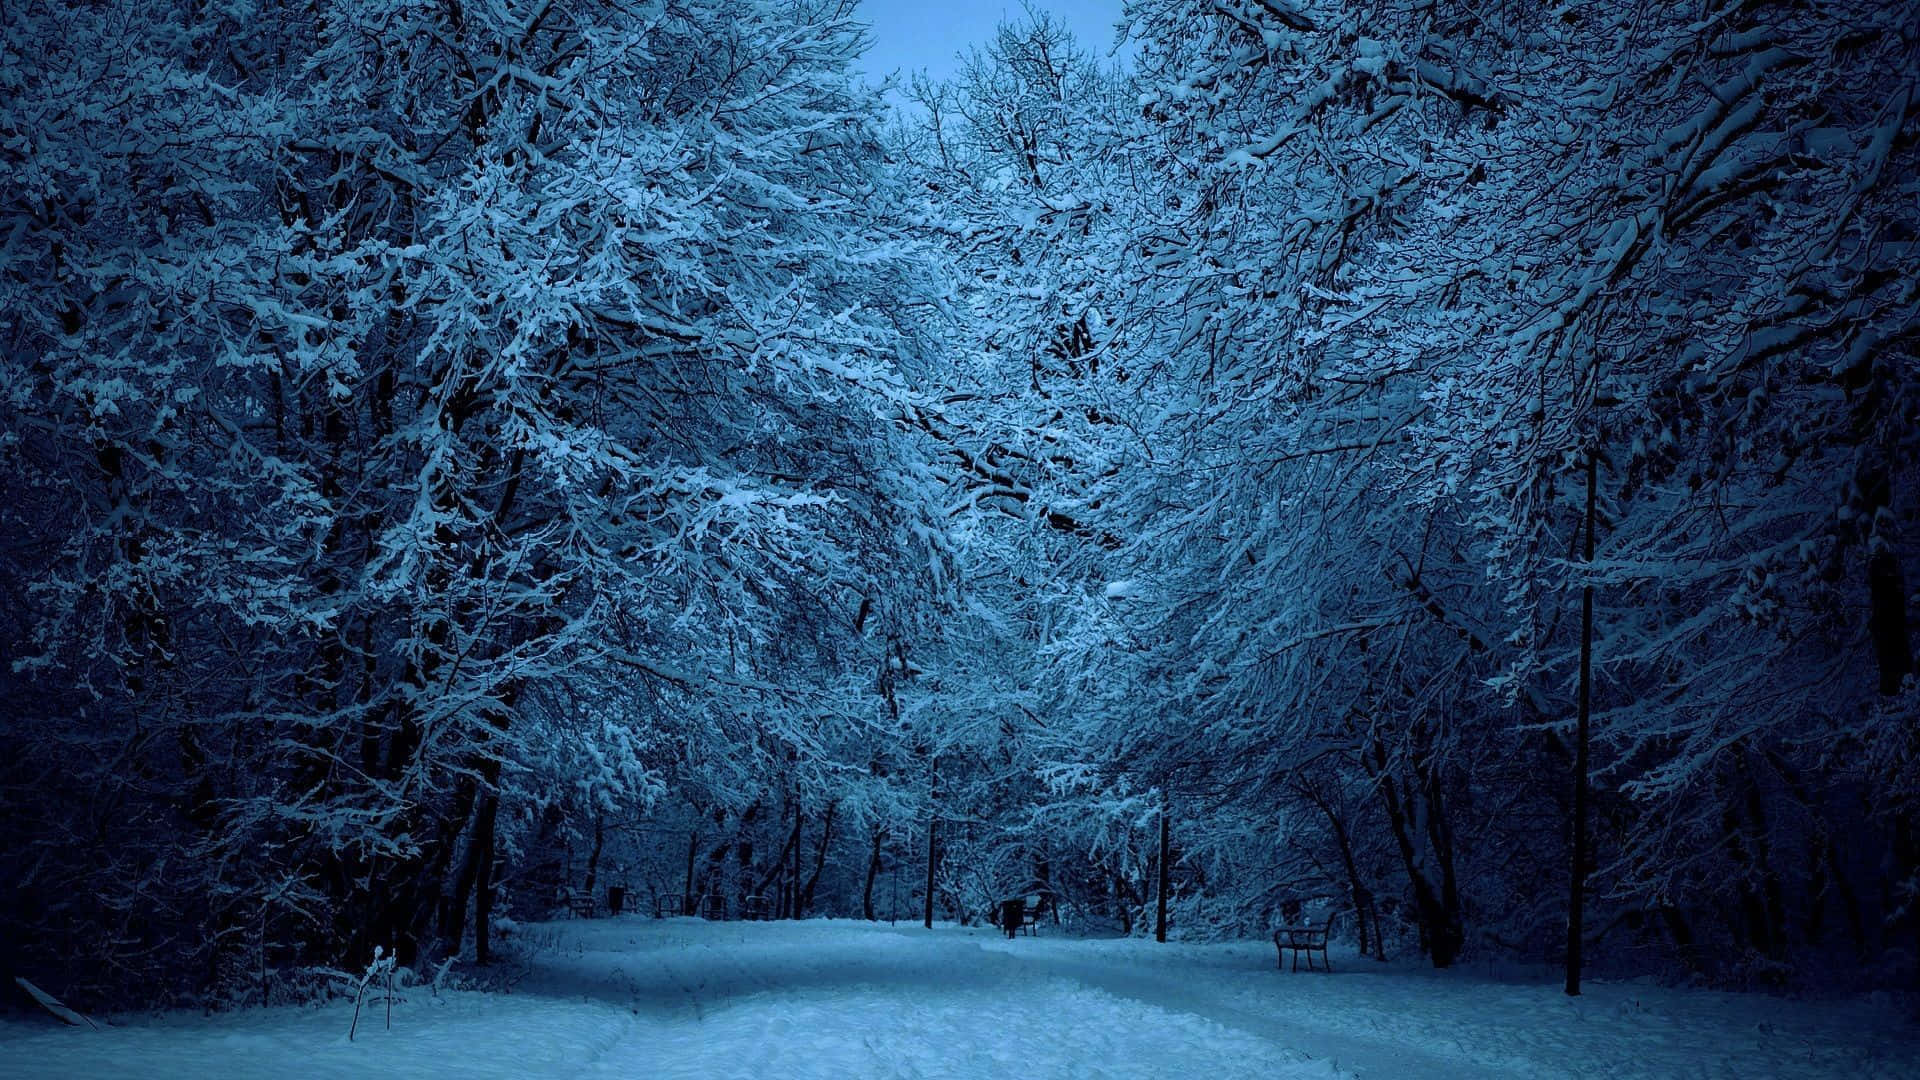 "The Magical Beauty of Winter Forests"